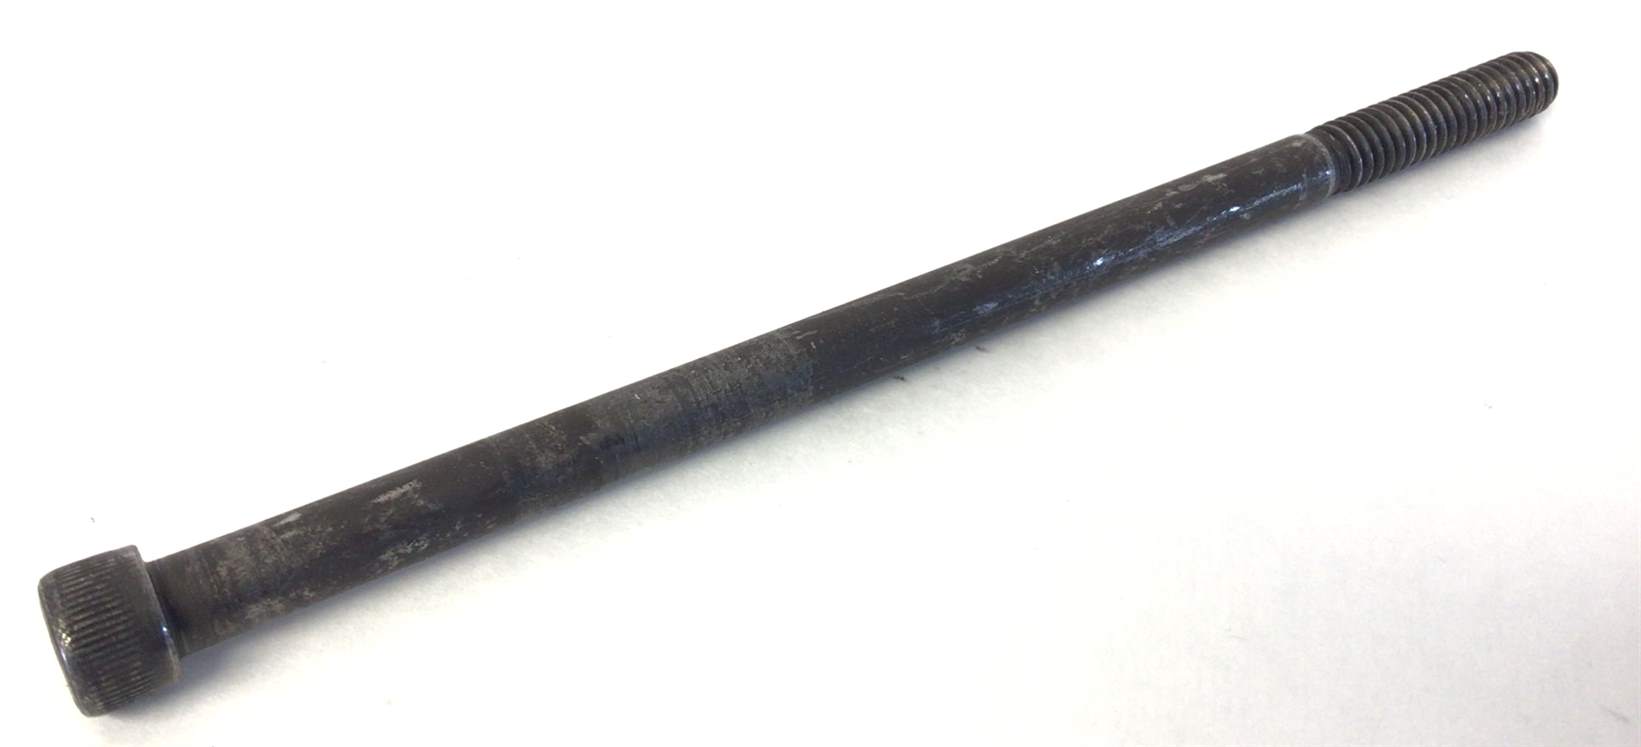 Long Socket Cap 1/4 Inch - 20 x 5 Inches (Used)